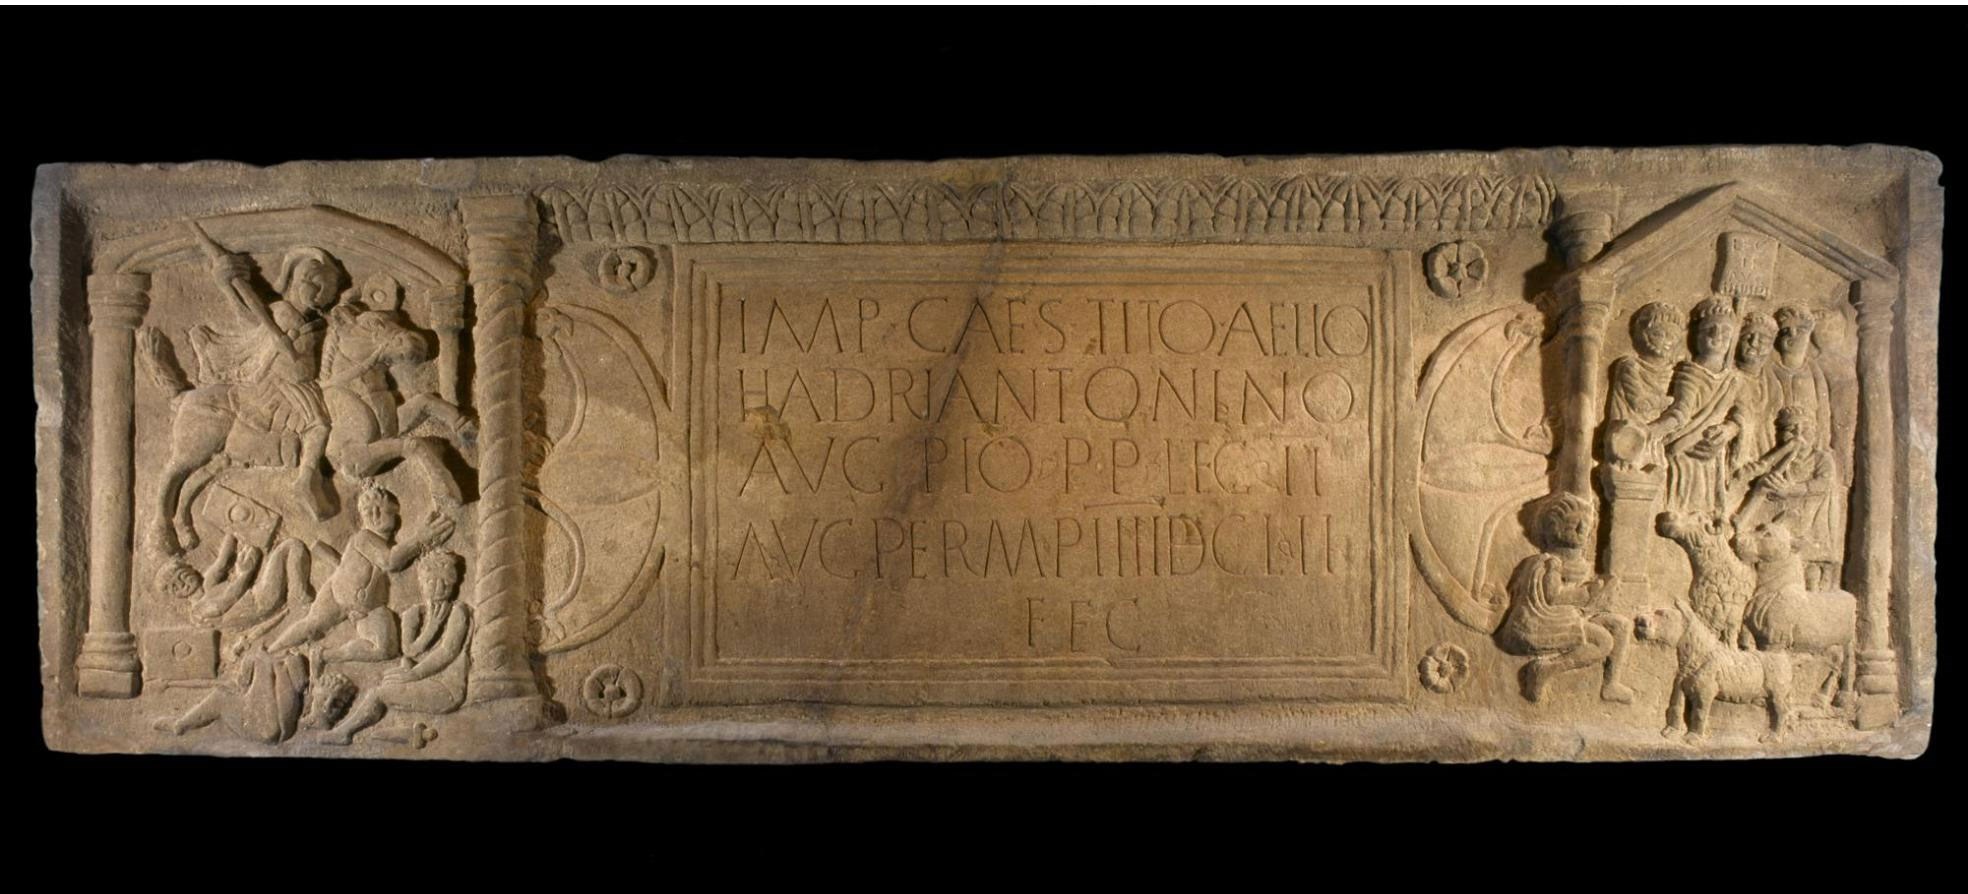 Commemorative stone from the Antonine Wall